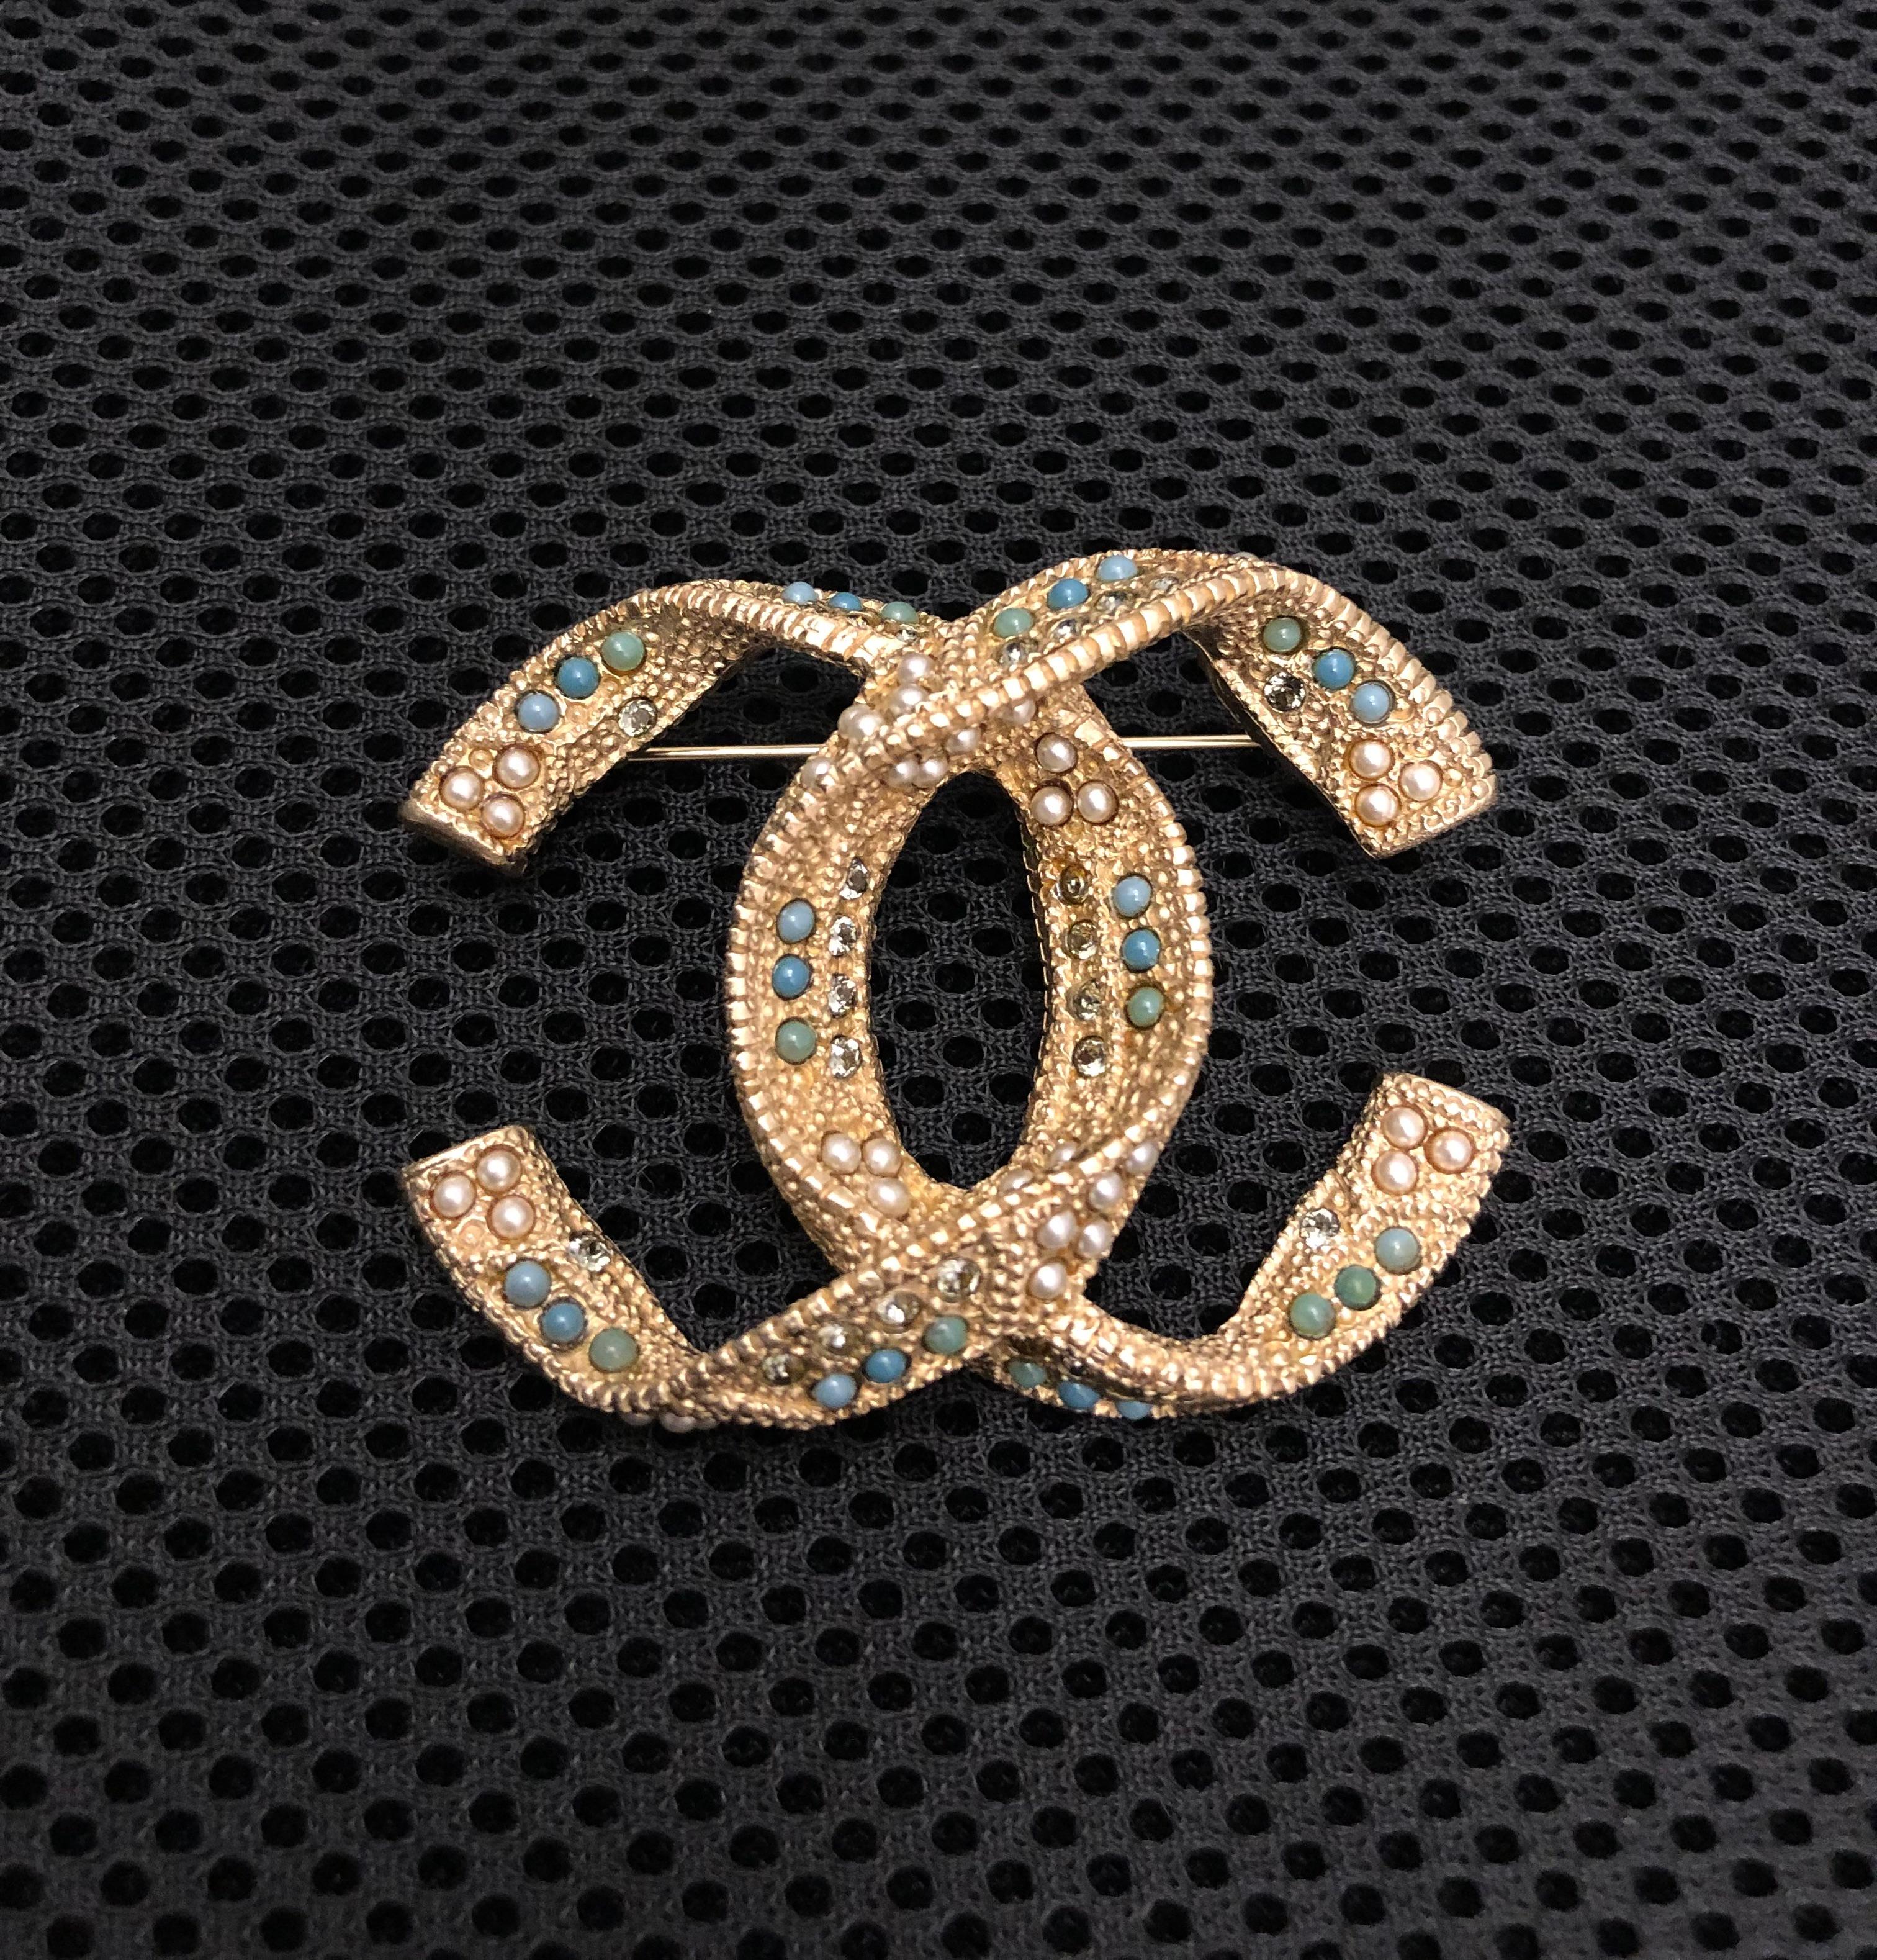 This CHANEL CC brooch is crafted of gold toned metal encrusted with colored fauxpearls and rhinestones. Stamped A15 K made in France. Measures approximately 5.6 x 4.2 cm. Comes with box.

Condition: Like new and in excellent condition. Minimal to no